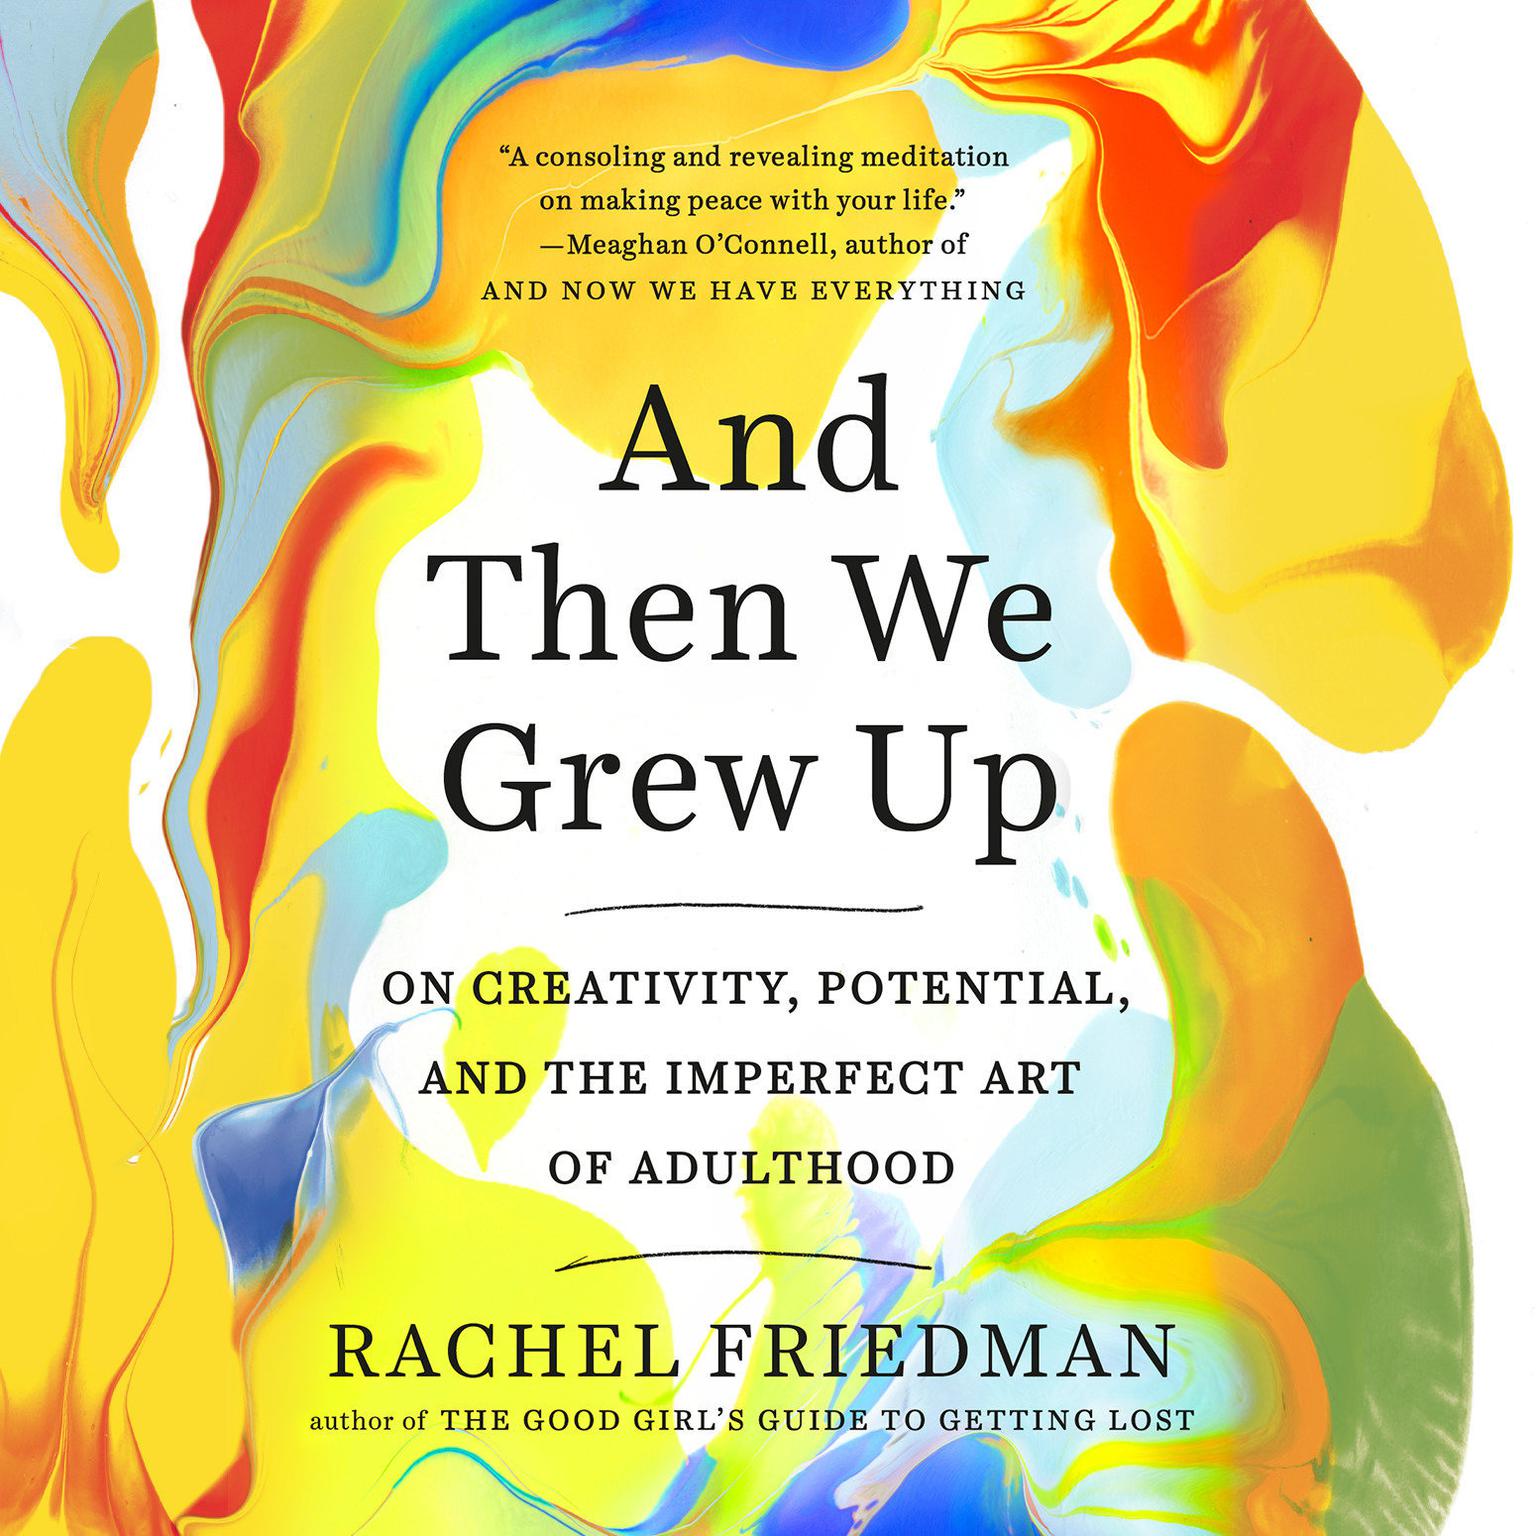 And Then We Grew Up: On Creativity, Potential, and the Imperfect Art of Adulthood Audiobook, by Rachel Friedman